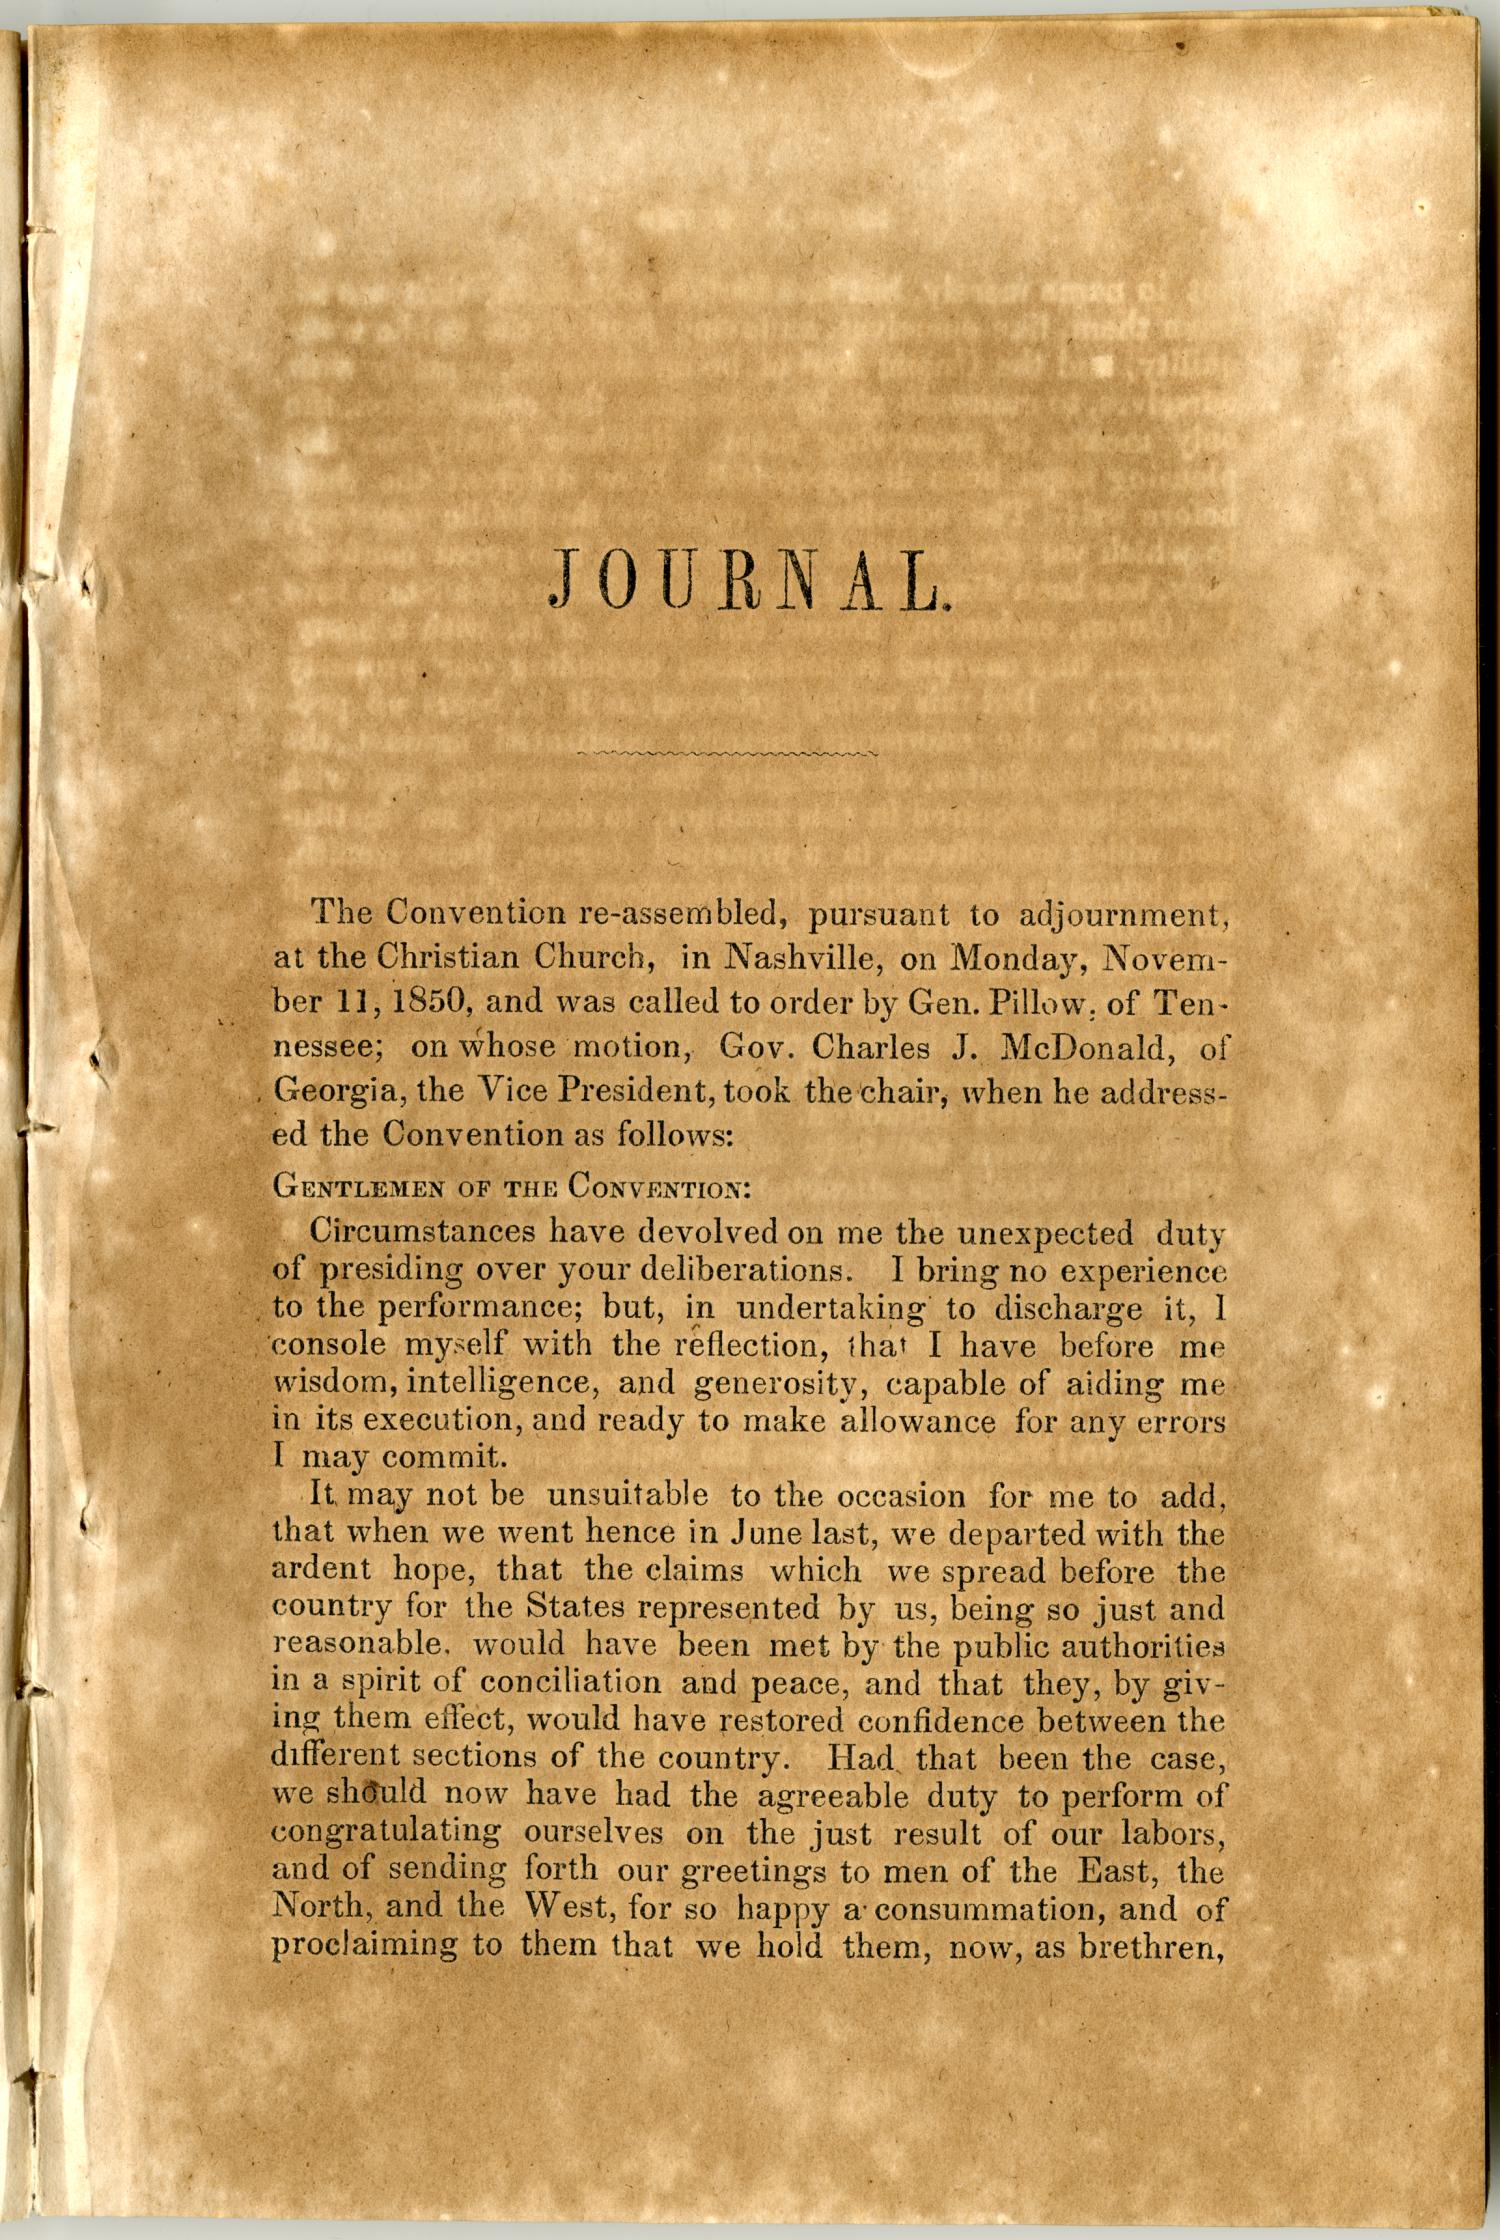 Journal of proceedings of the Southern Convention, at its adjourned session : held at Nashville, Tenn., Nov. 11, 1850, and subsequent days.
                                                
                                                    [Sequence #]: 3 of 36
                                                